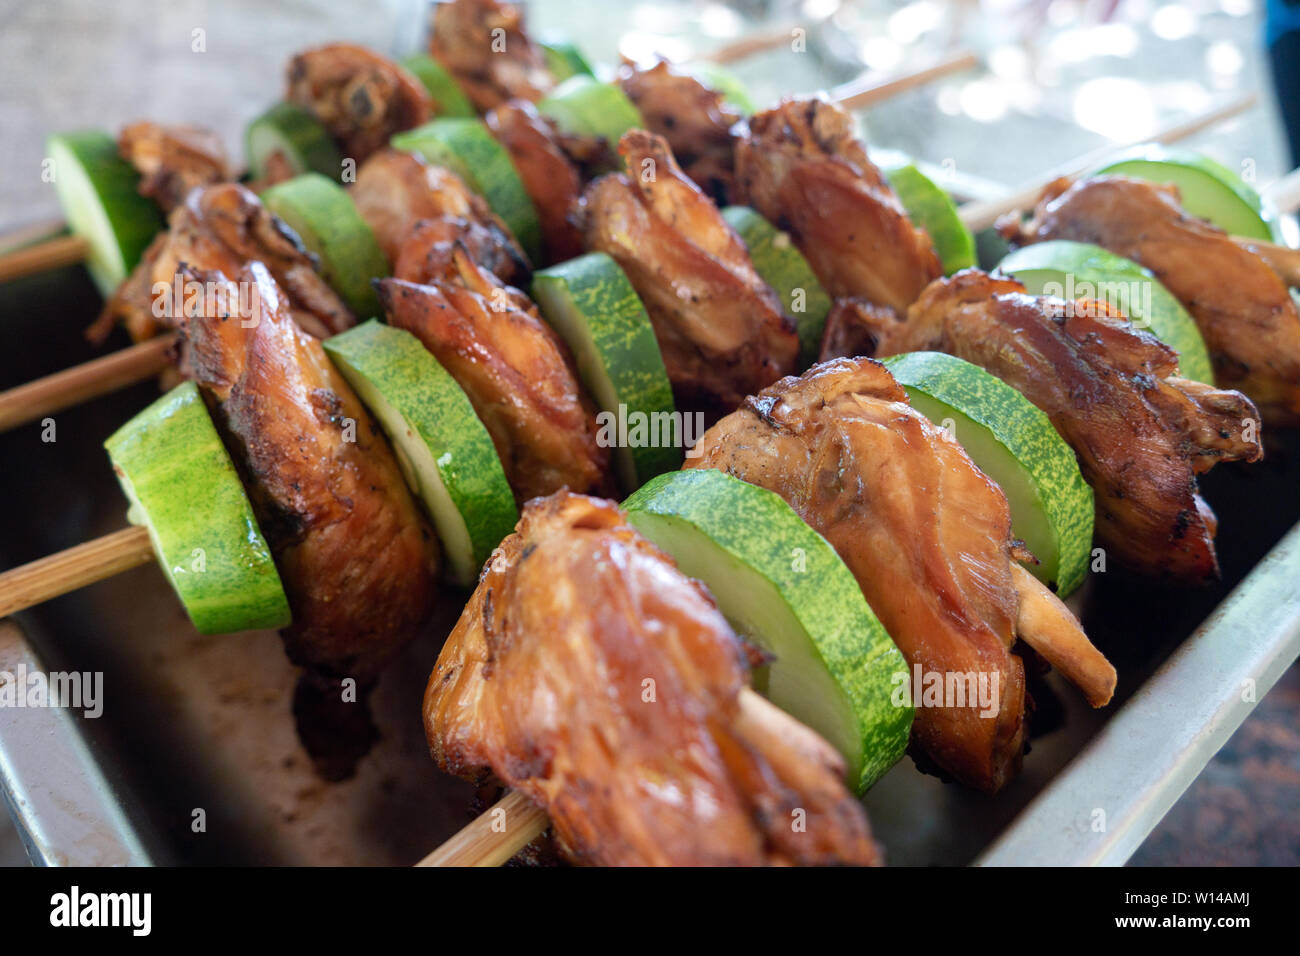 Filipino traditional authentic dish: philippine roasted chicken or pork barbecue on a stick with cucumber Stock Photo